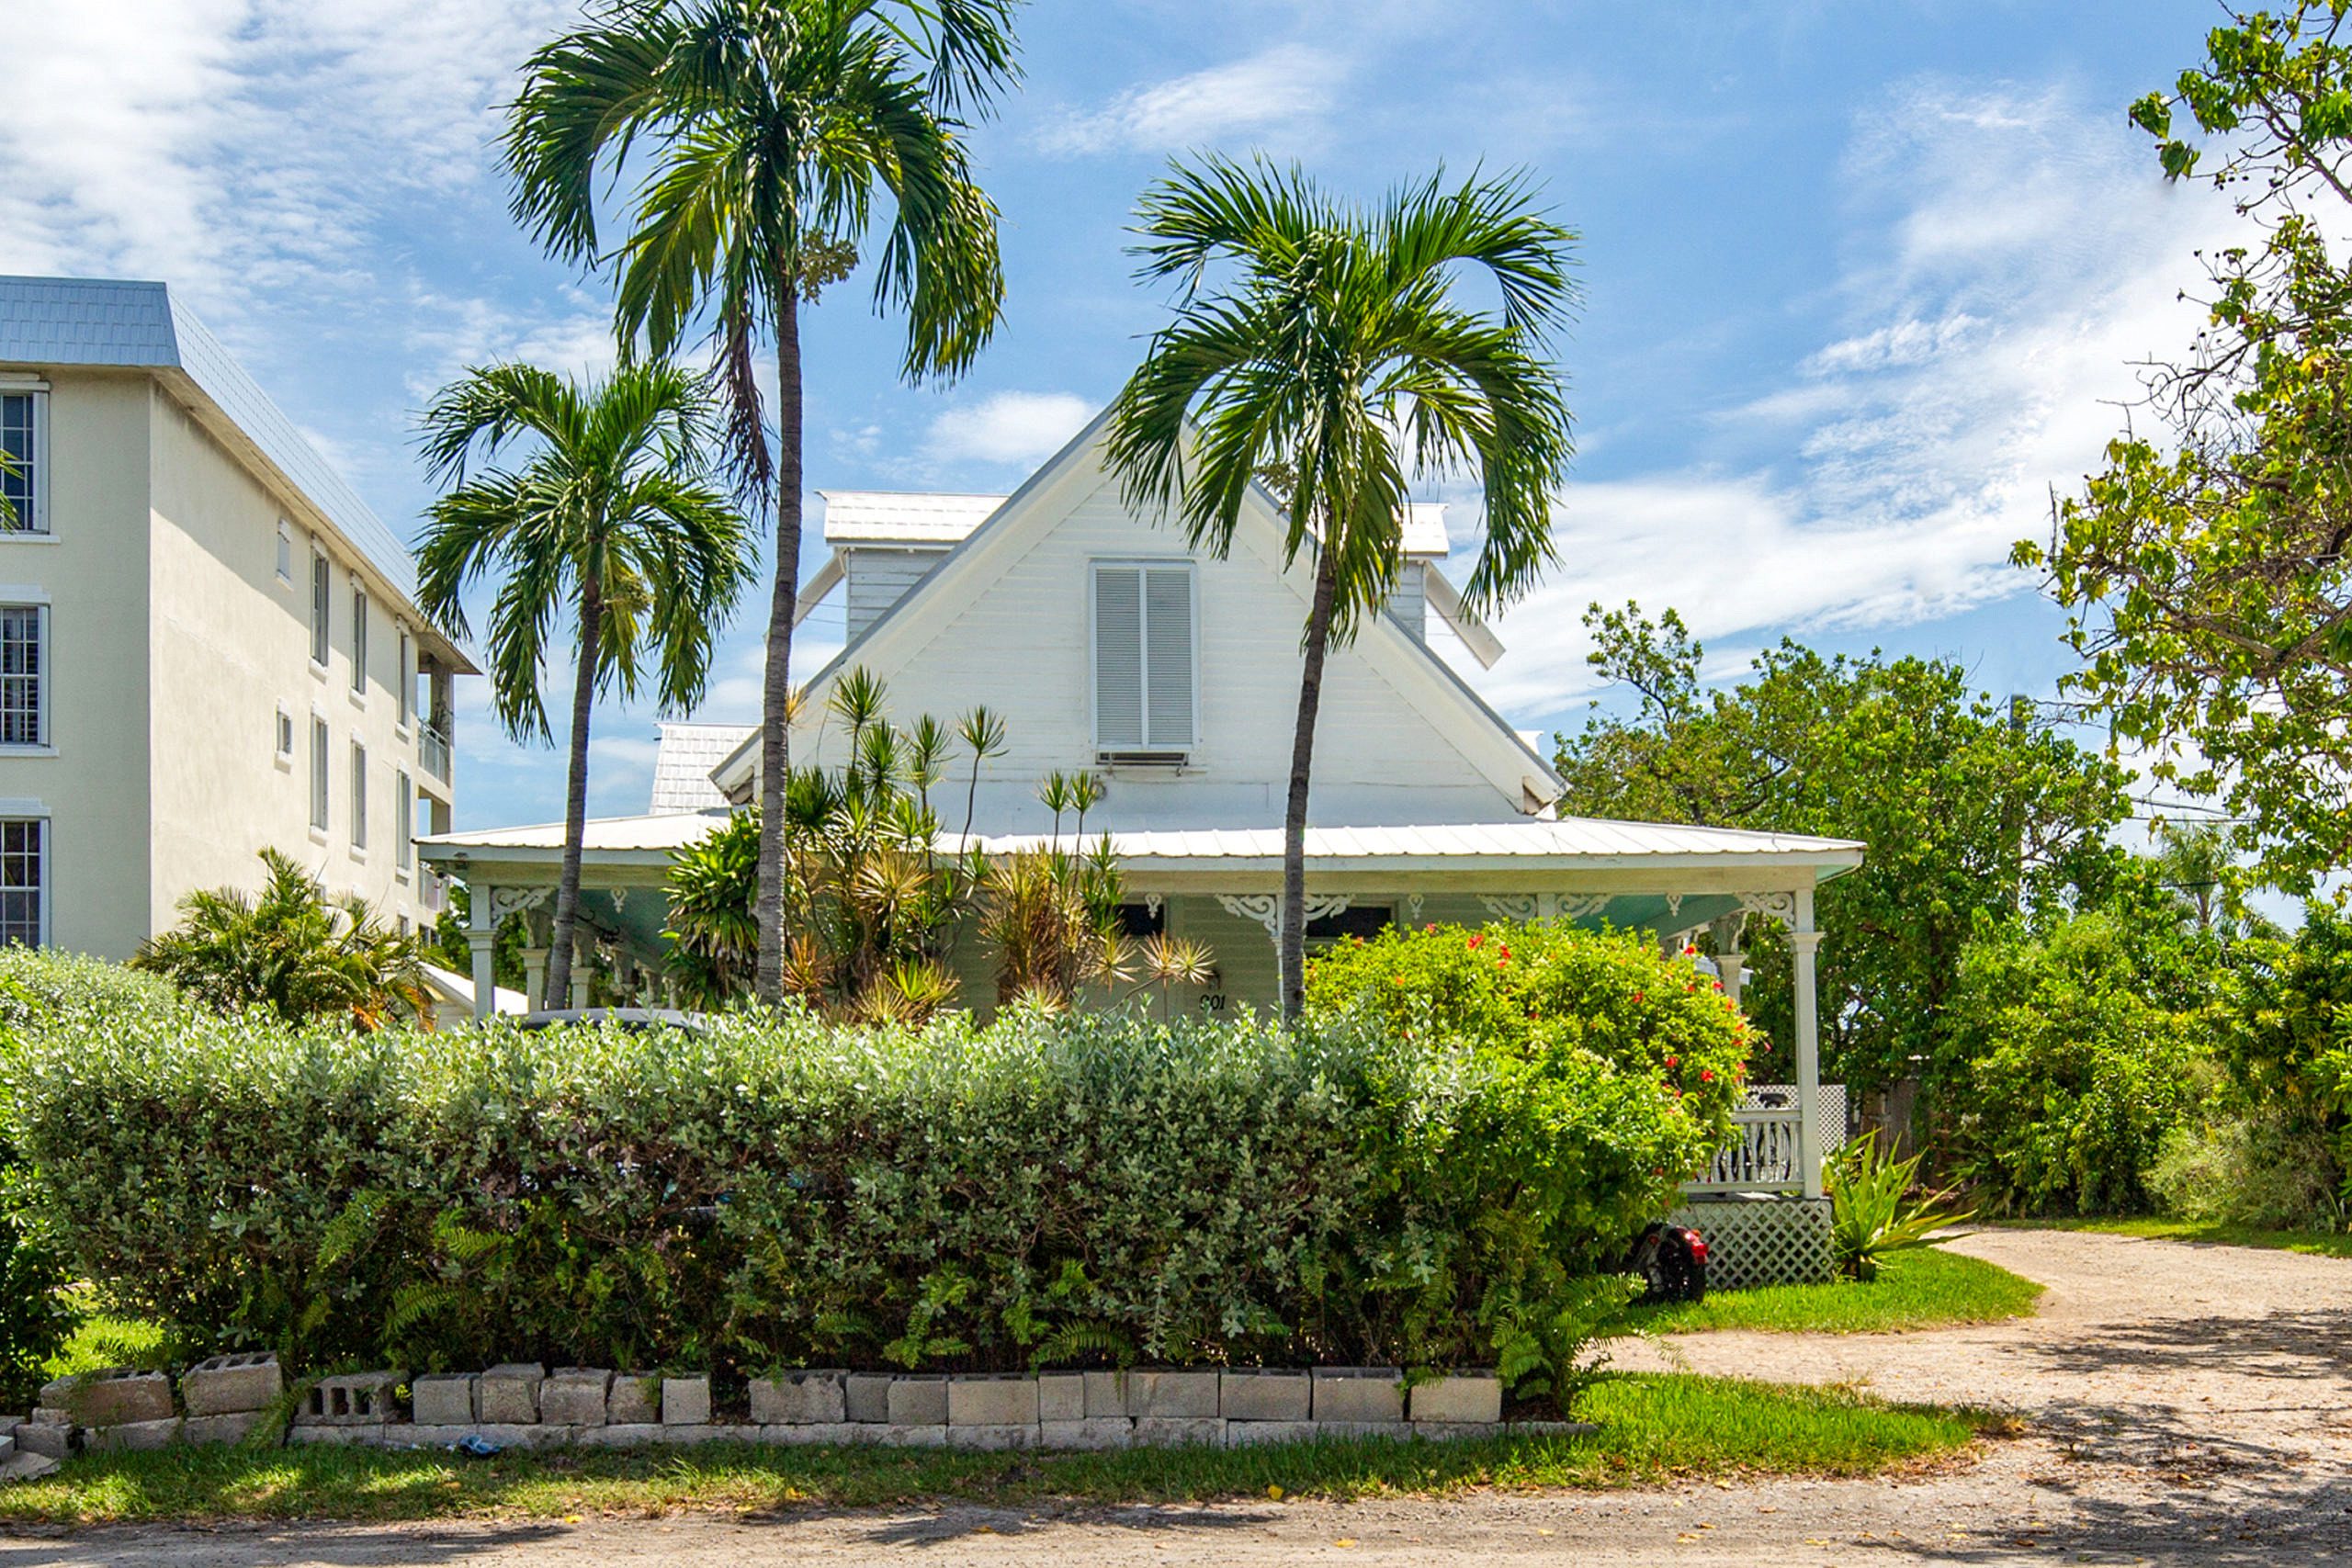 The Knight Home: Key West Commercial waterfront property for sale